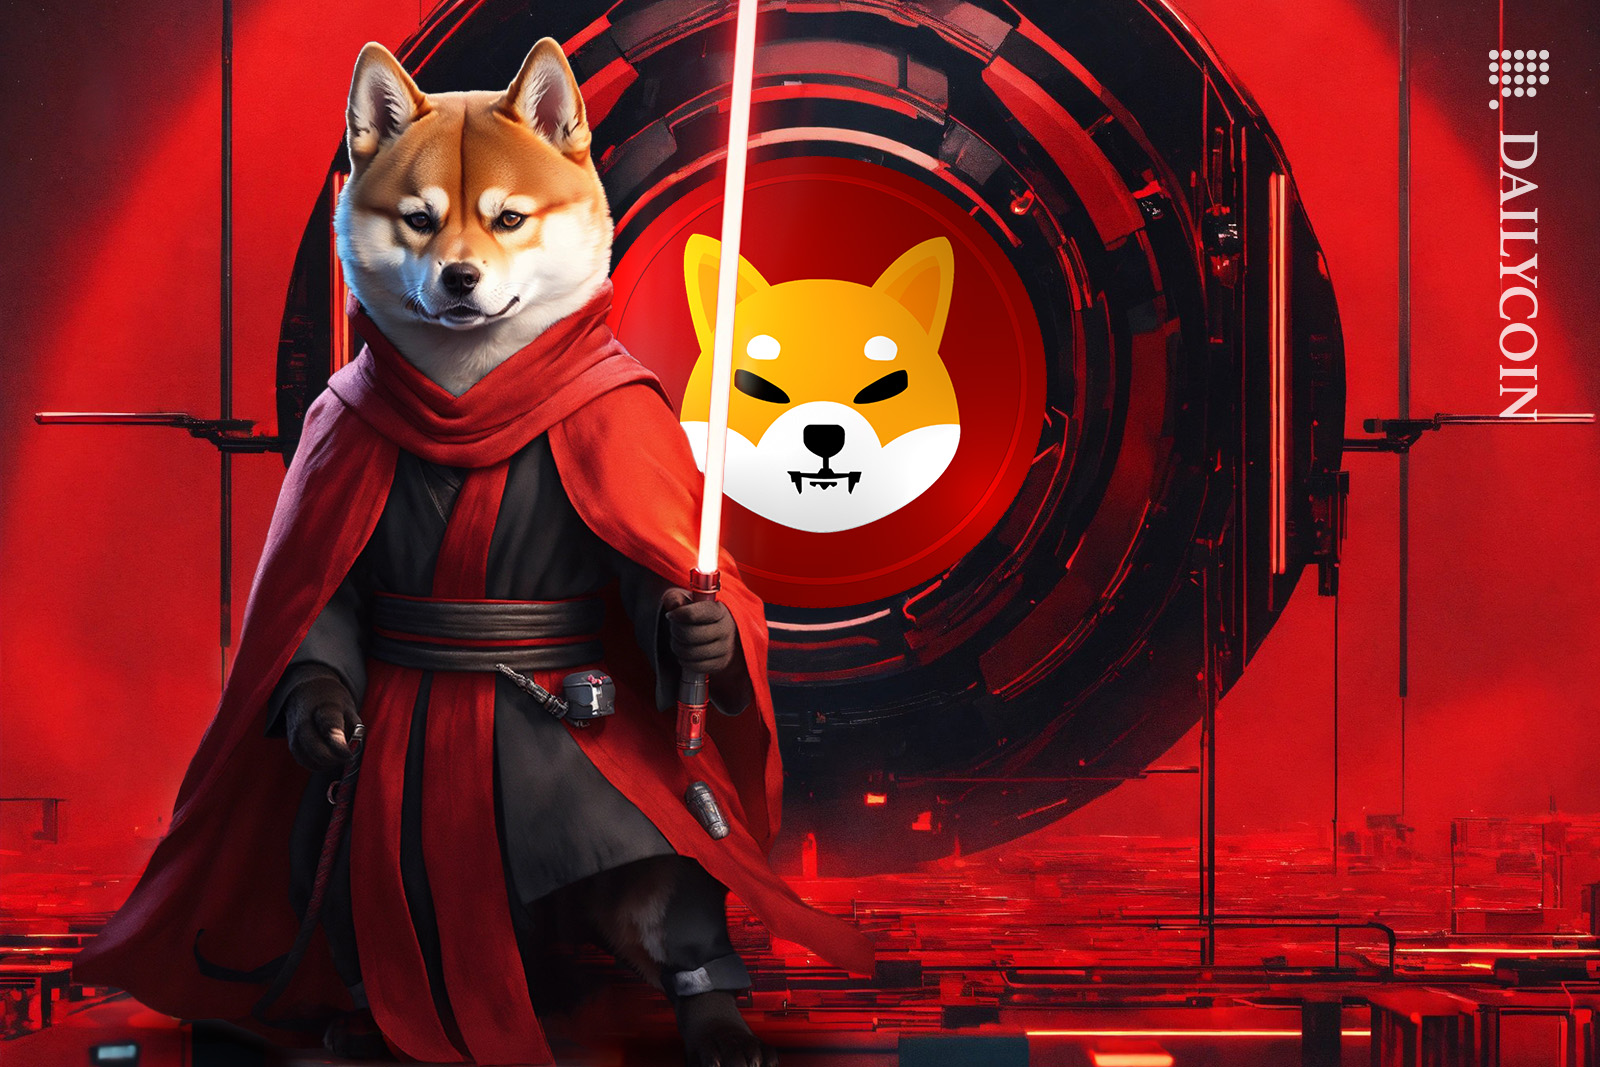 Shiba inu is ready to fight for his Shib token.